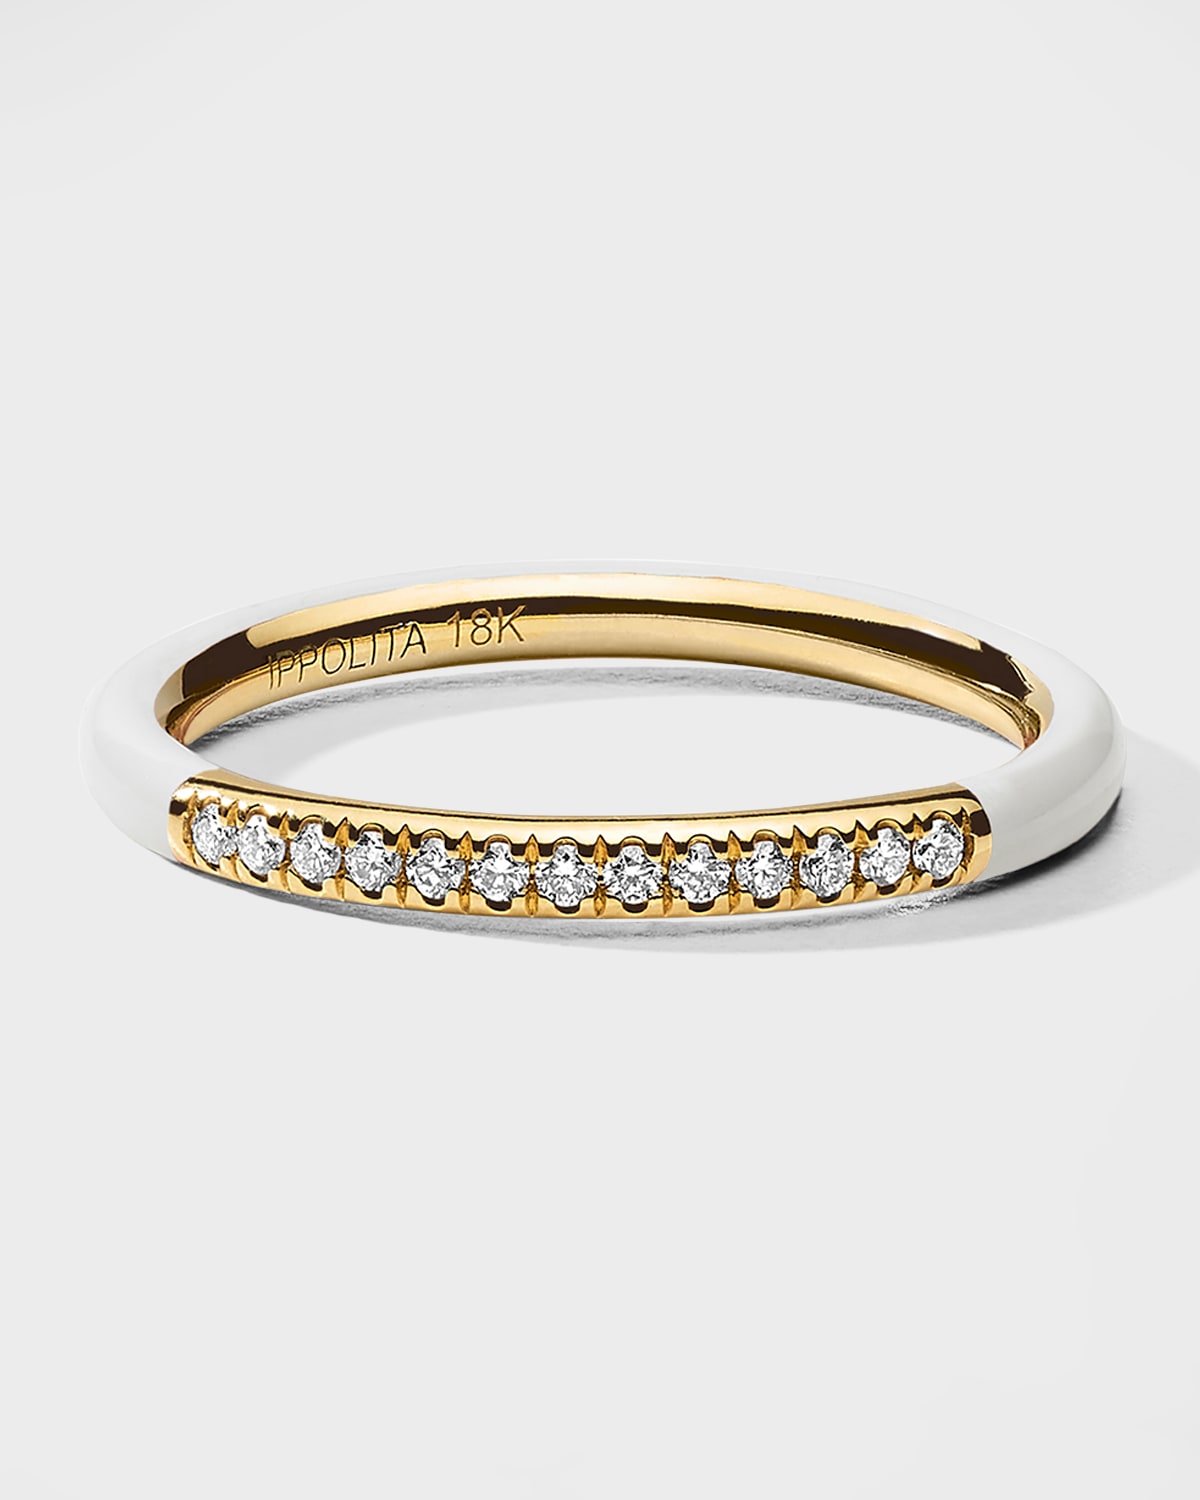 IPPOLITA BAND RING IN 18K GOLD WITH DIAMONDS,PROD238740448